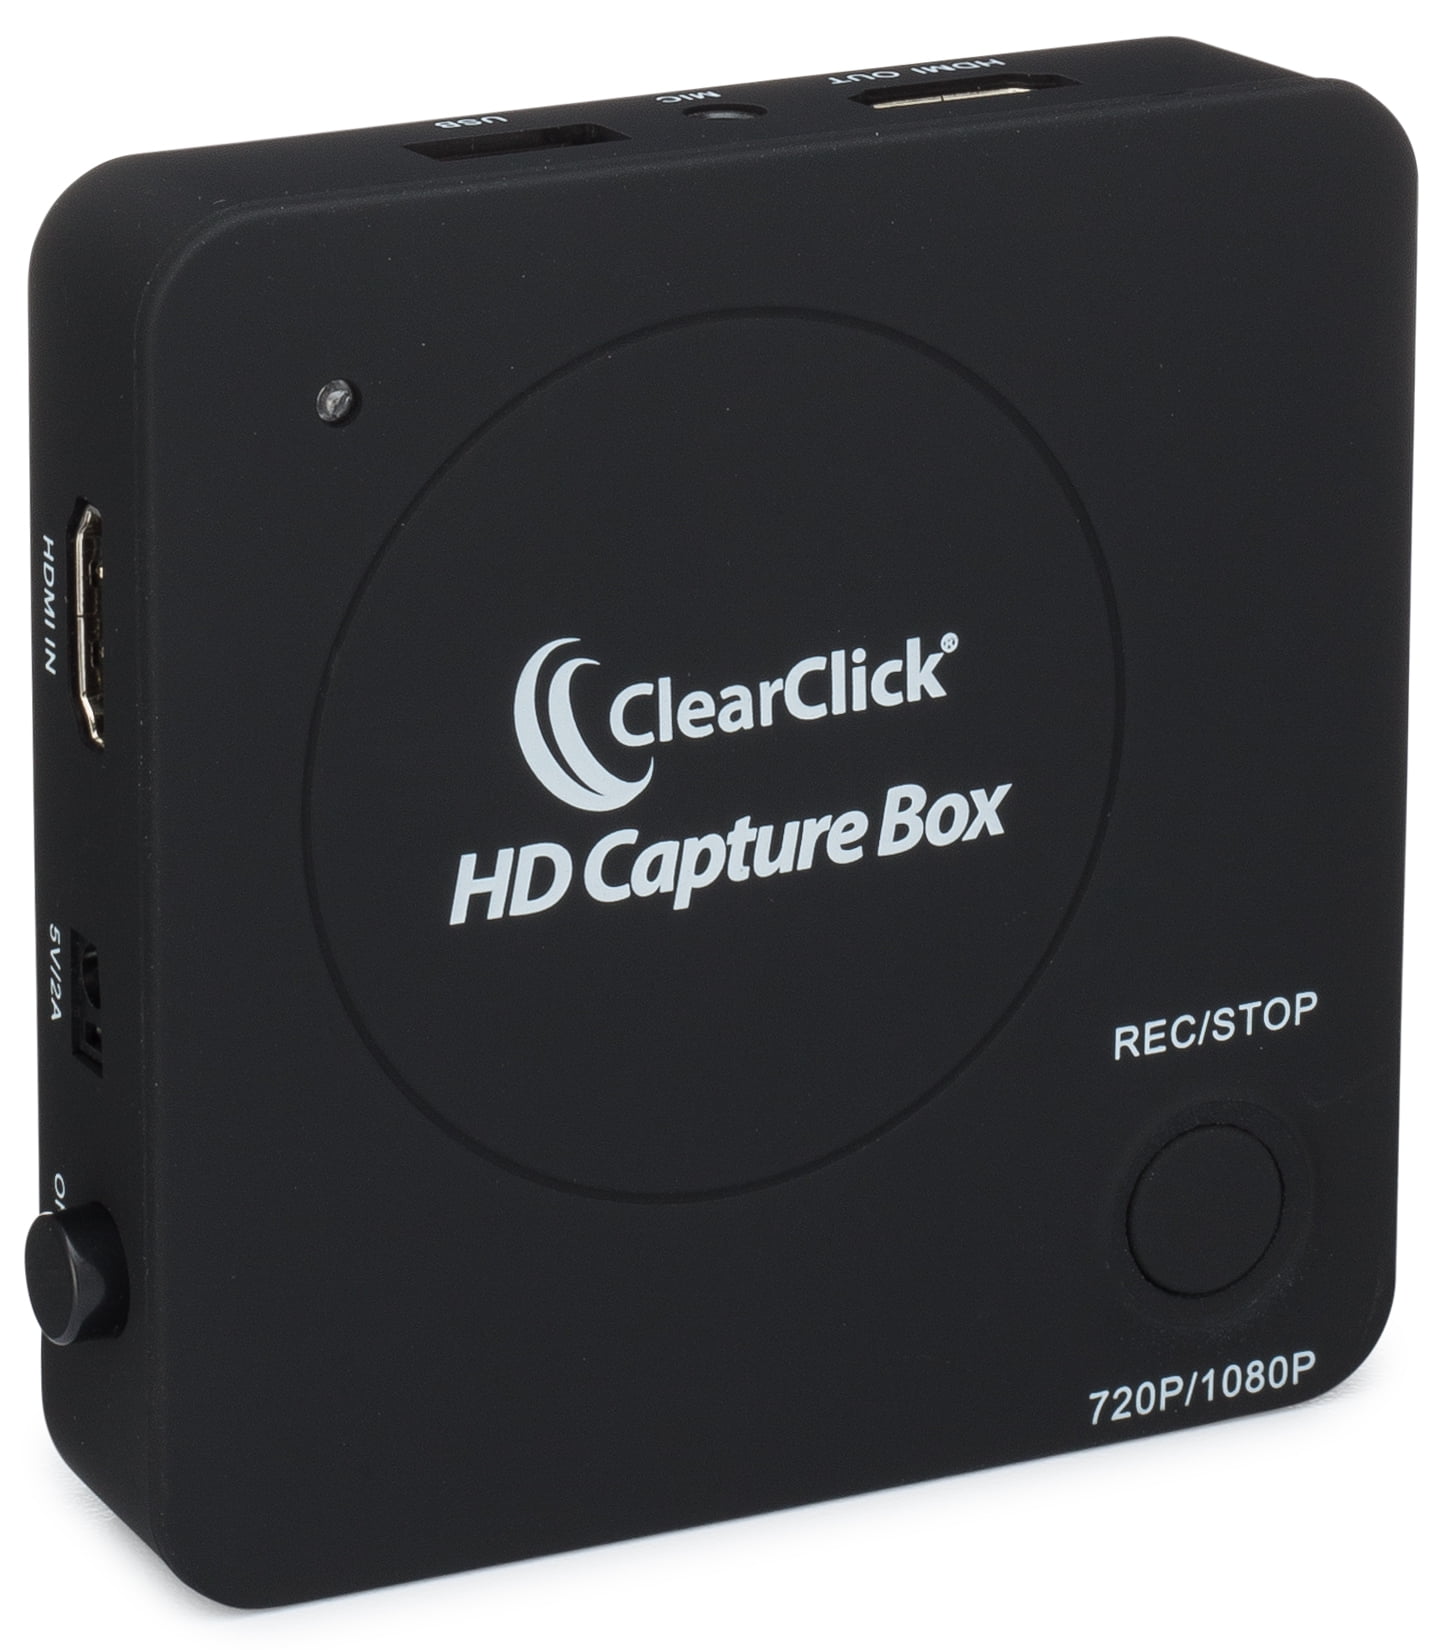 ClearClick HD Capture Box Capture Video from Gaming Devices & HDMI Sources No Computer Required